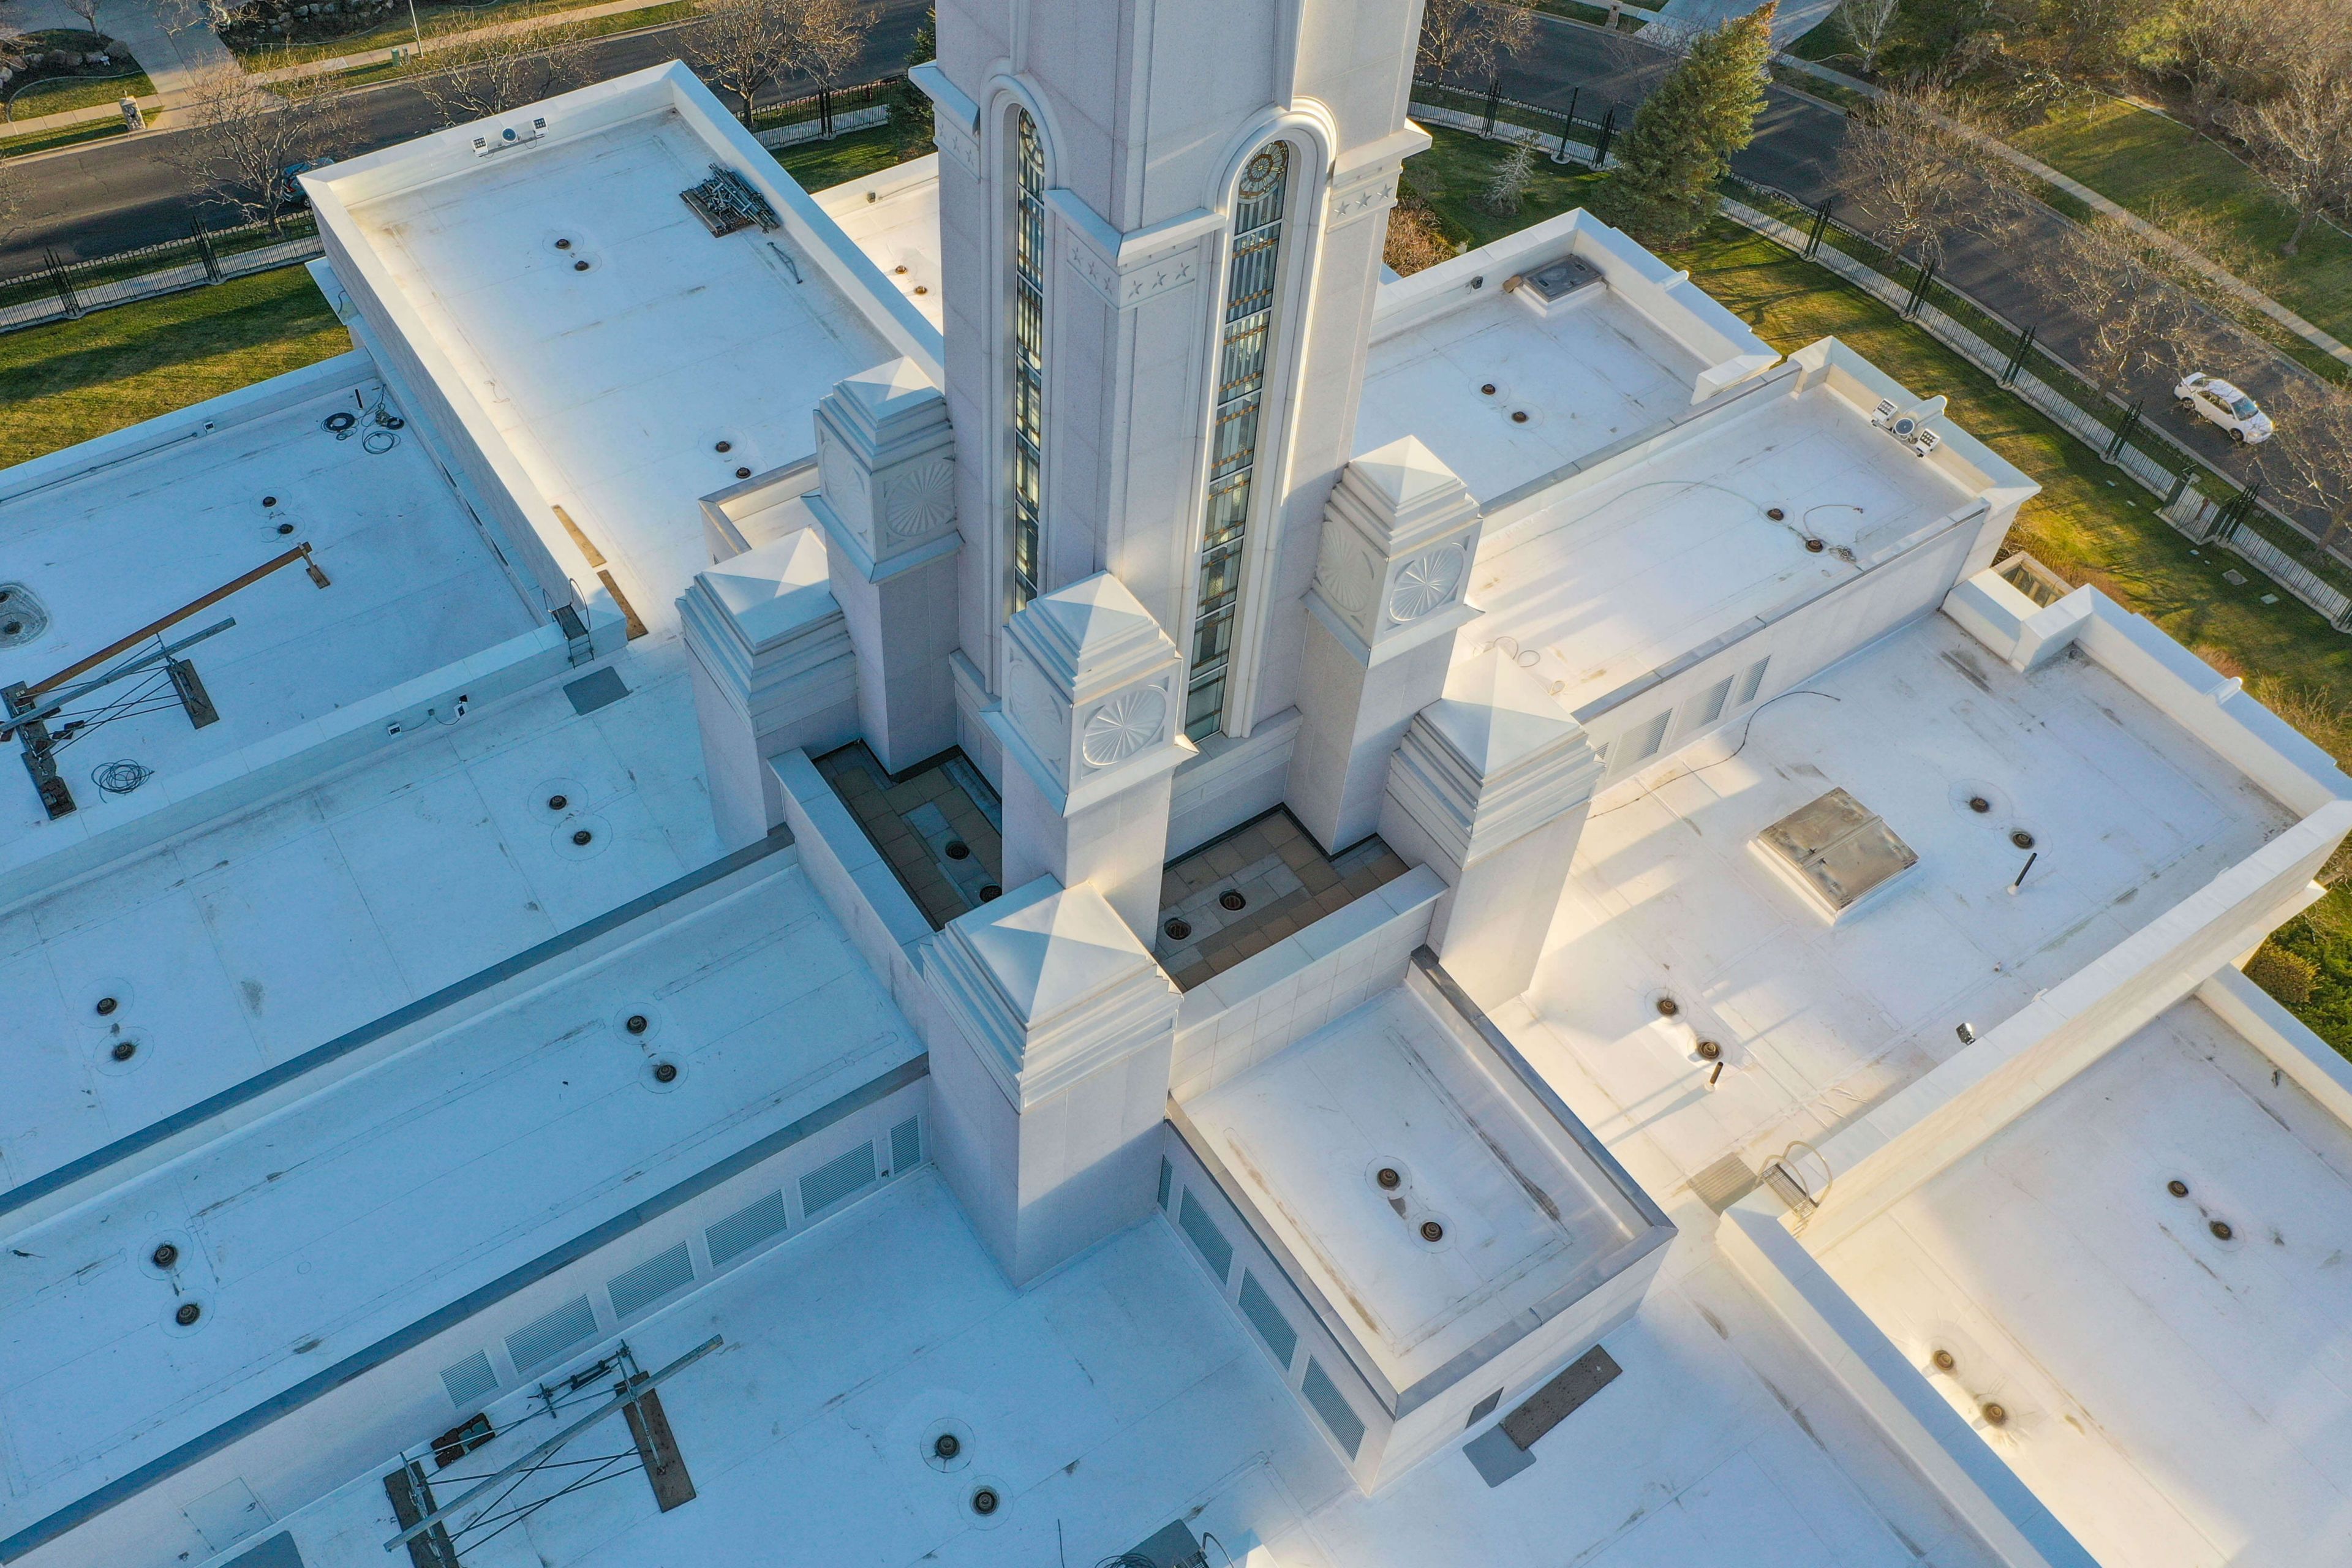 Close up aerial view of the Bountiful Temple with a spire in the center and white roofing membrane on the roof